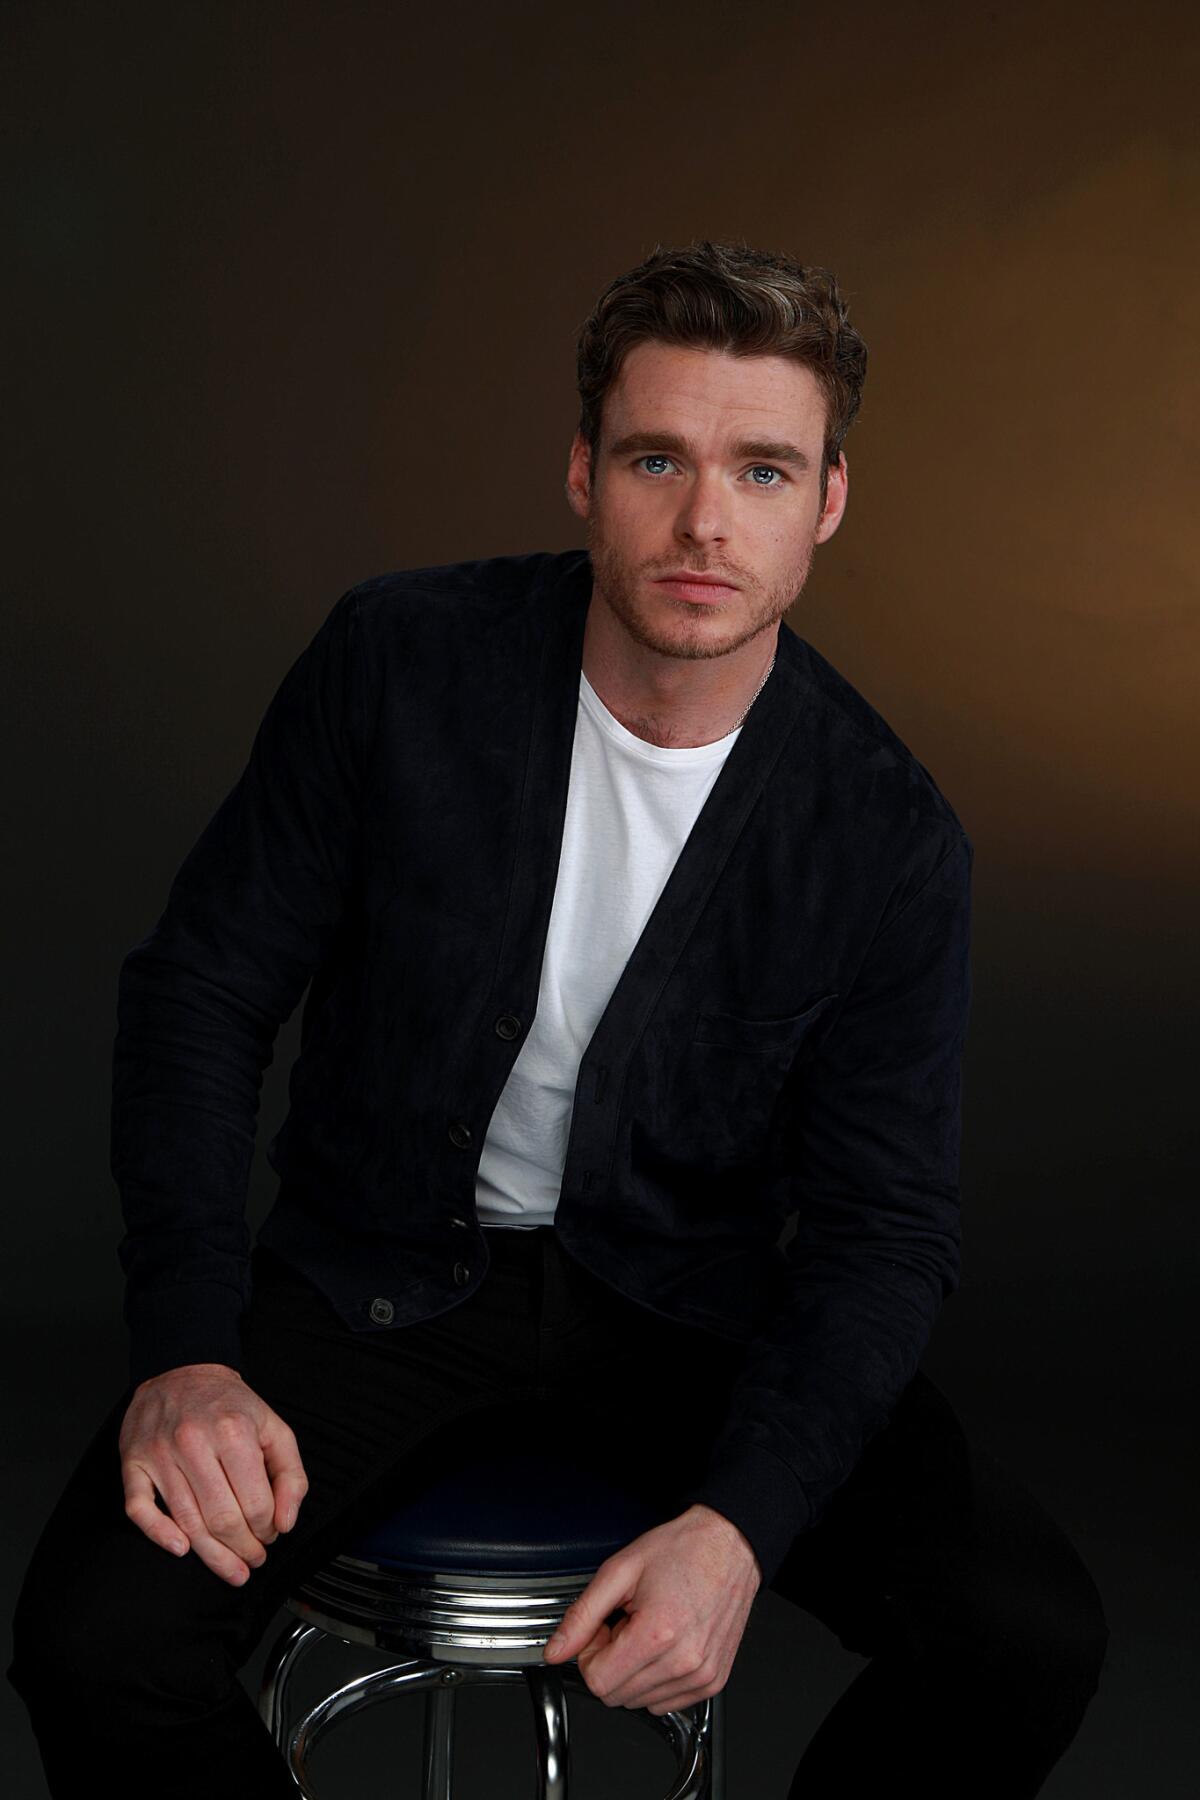 In the BBC drama "Bodyguard," Richard Madden plays a special protection officer tasked with keeping Britain’s home secretary safe.